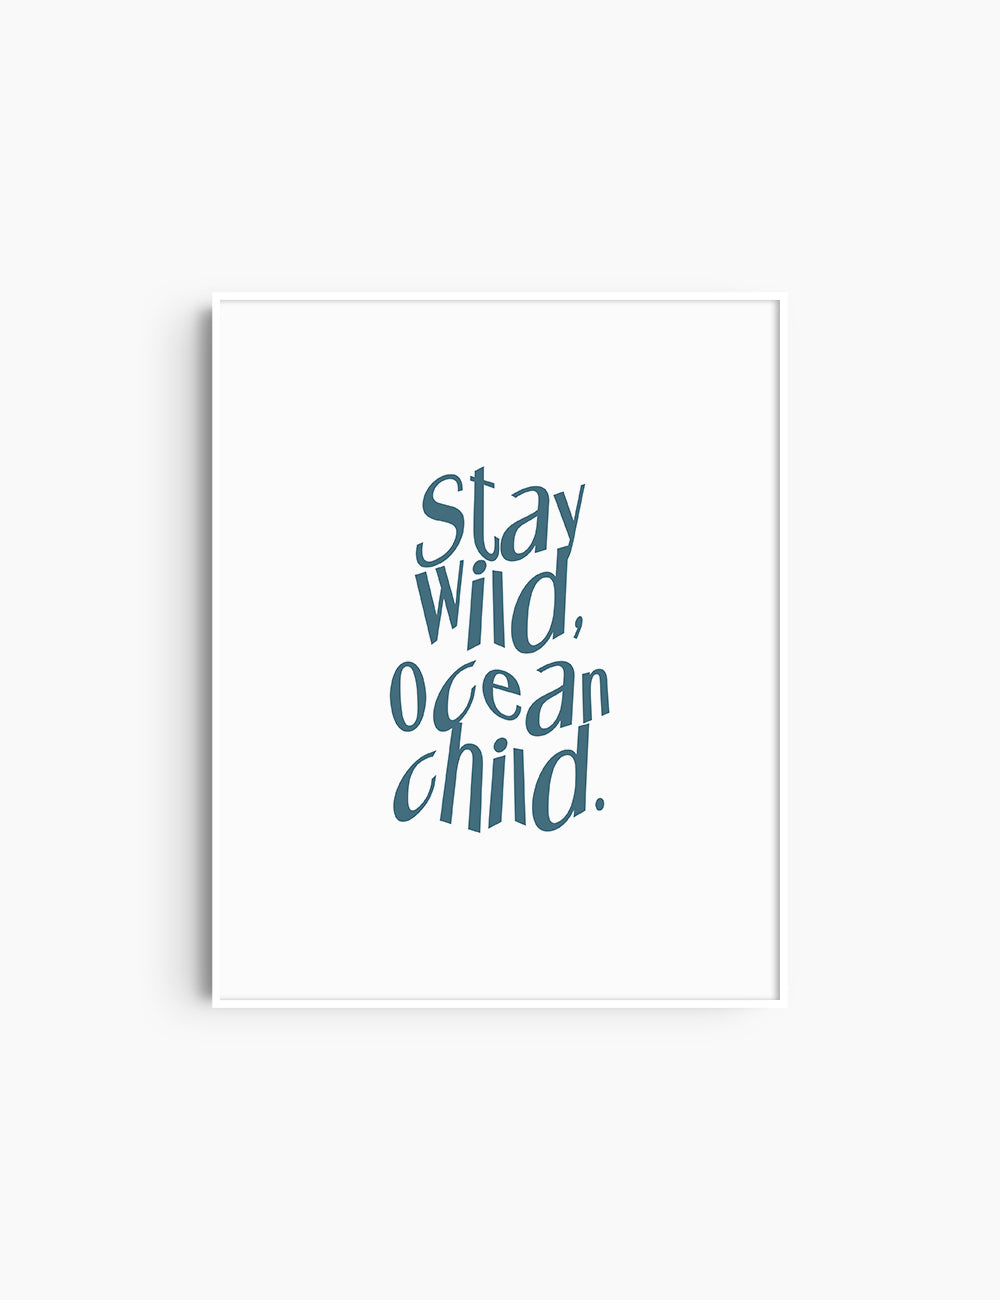 STAY WILD, OCEAN CHILD. Blue and White. Printable Wall Art Quote.